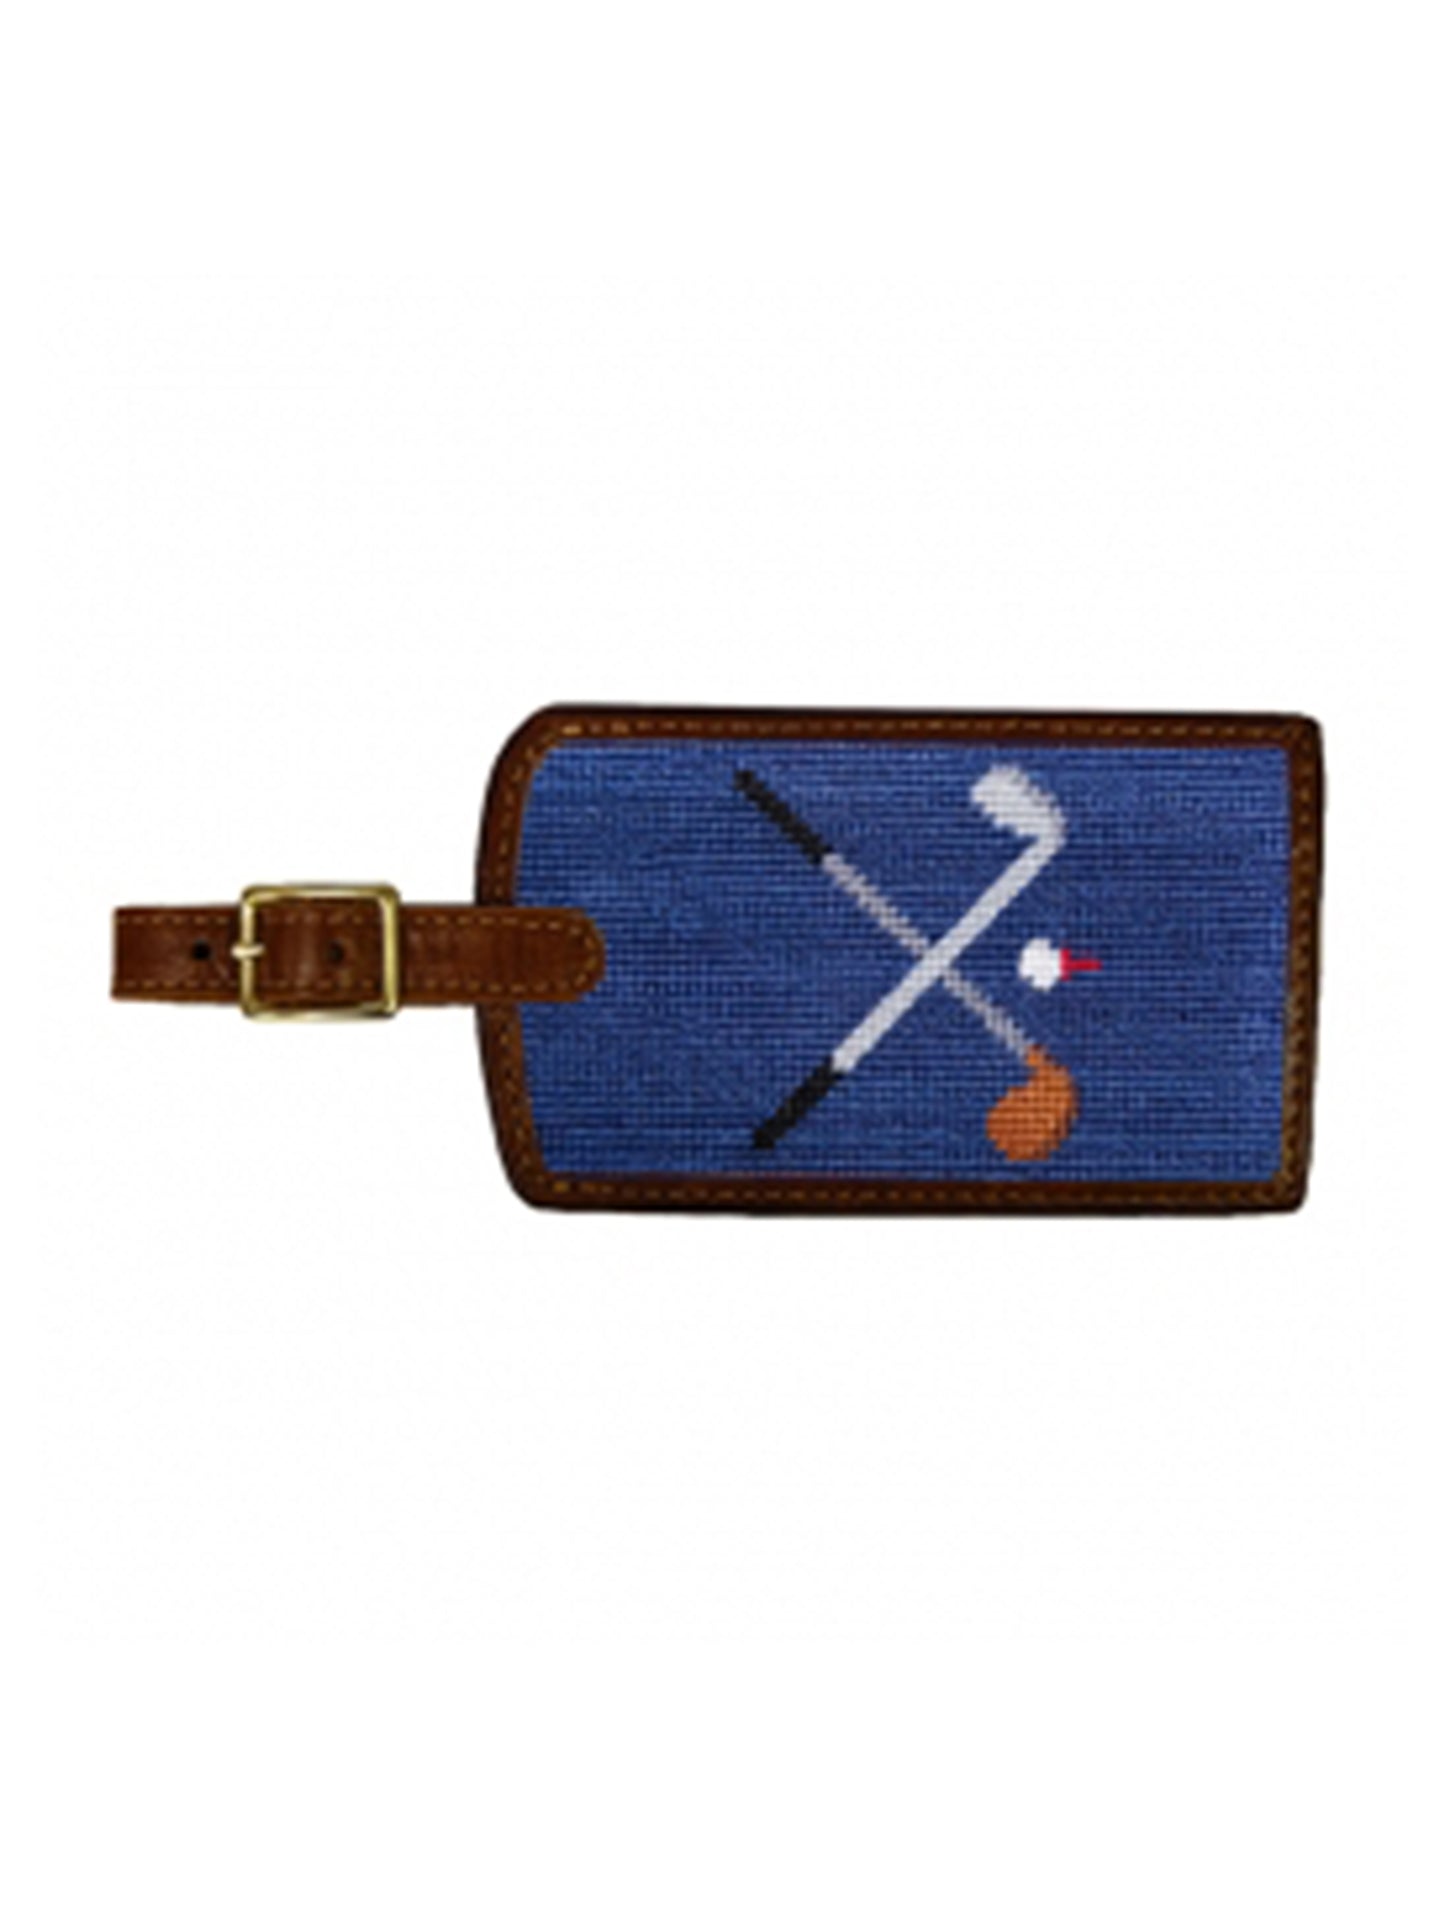 Smathers & Branson Crossed Golf Clubs Needlepoint Luggage Tag Weston Table